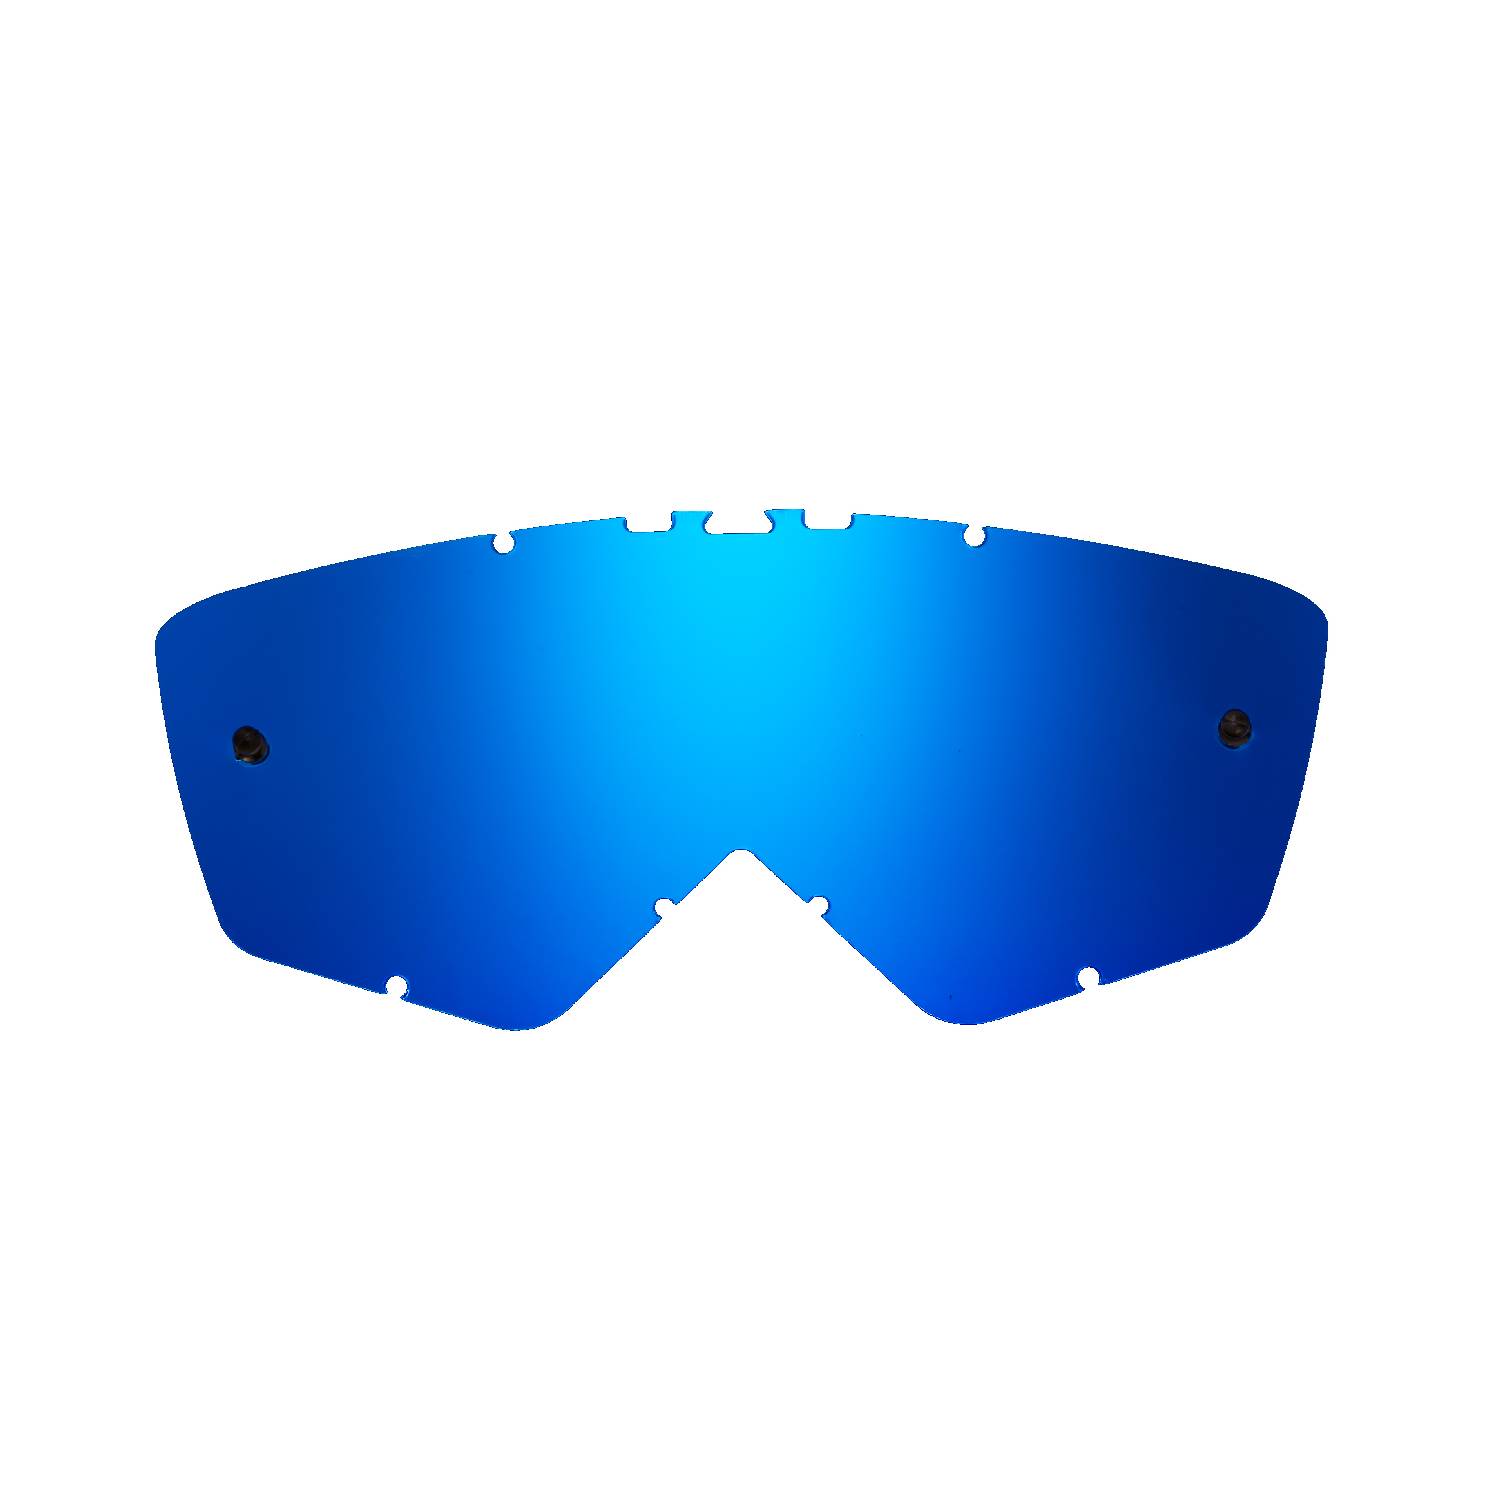 blue-toned mirrored replacement lenses for goggles compatible for Ariete Andrenaline RC07 / Ride And Roll goggle